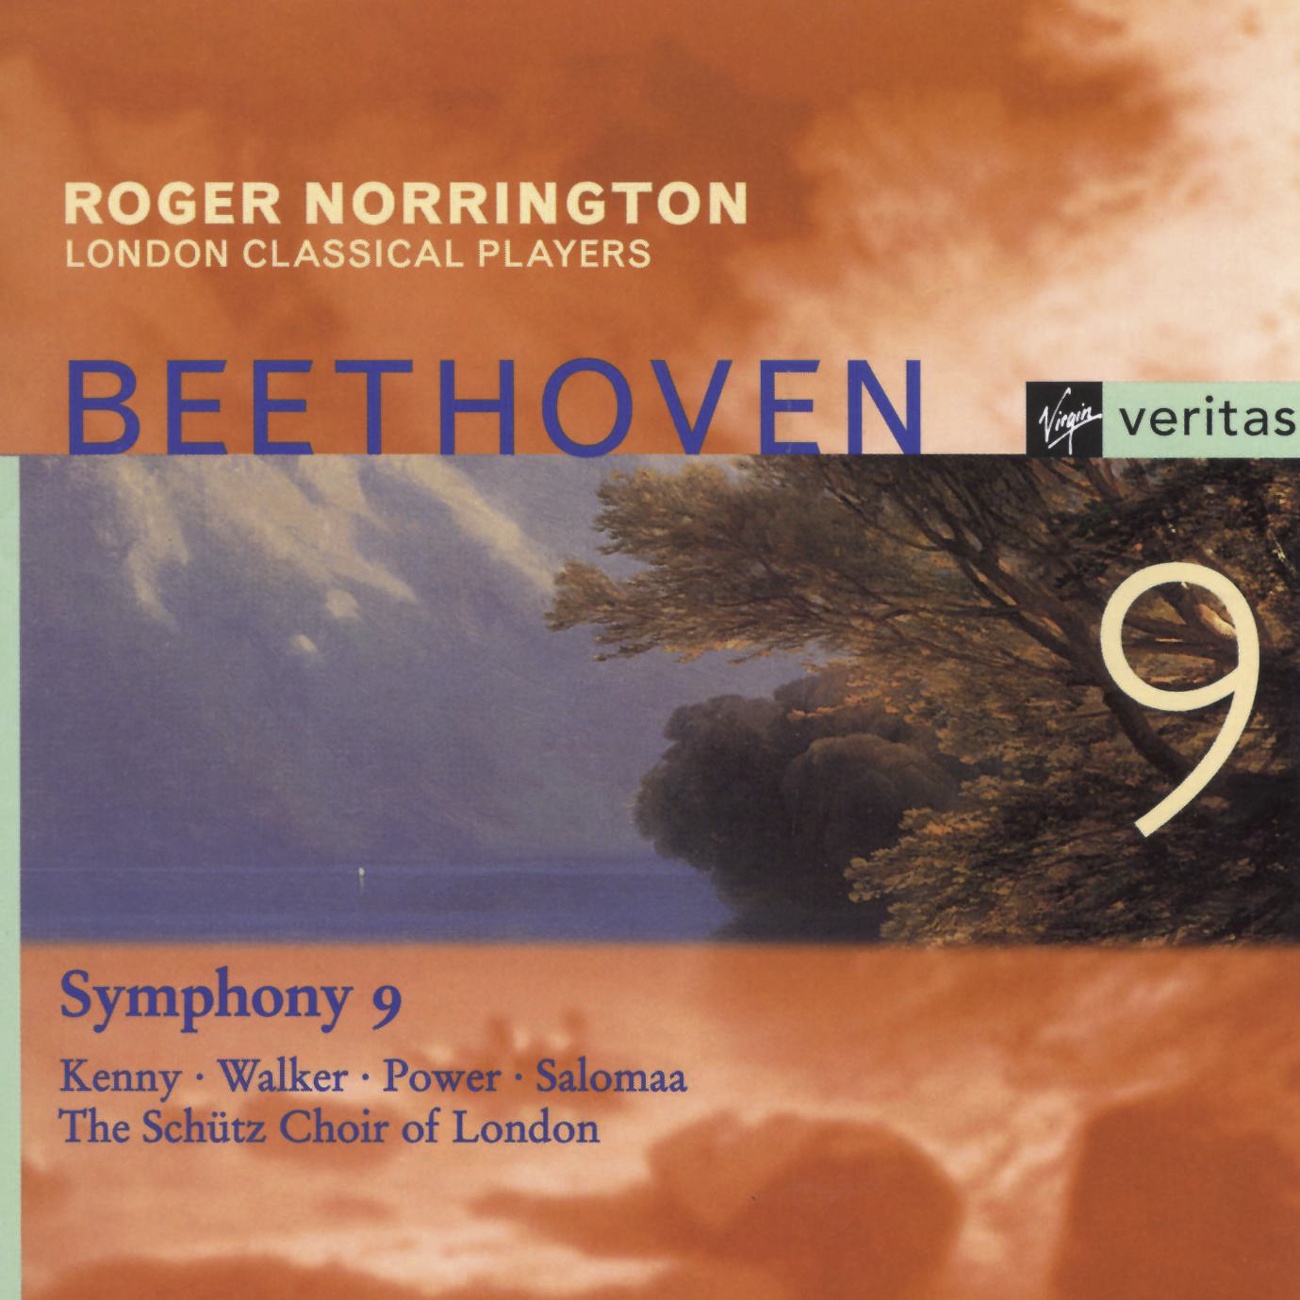 SYMPHONY NO. 9 IN D-MIN, OP 125 'CHORAL':II. MOLTO VIVACE